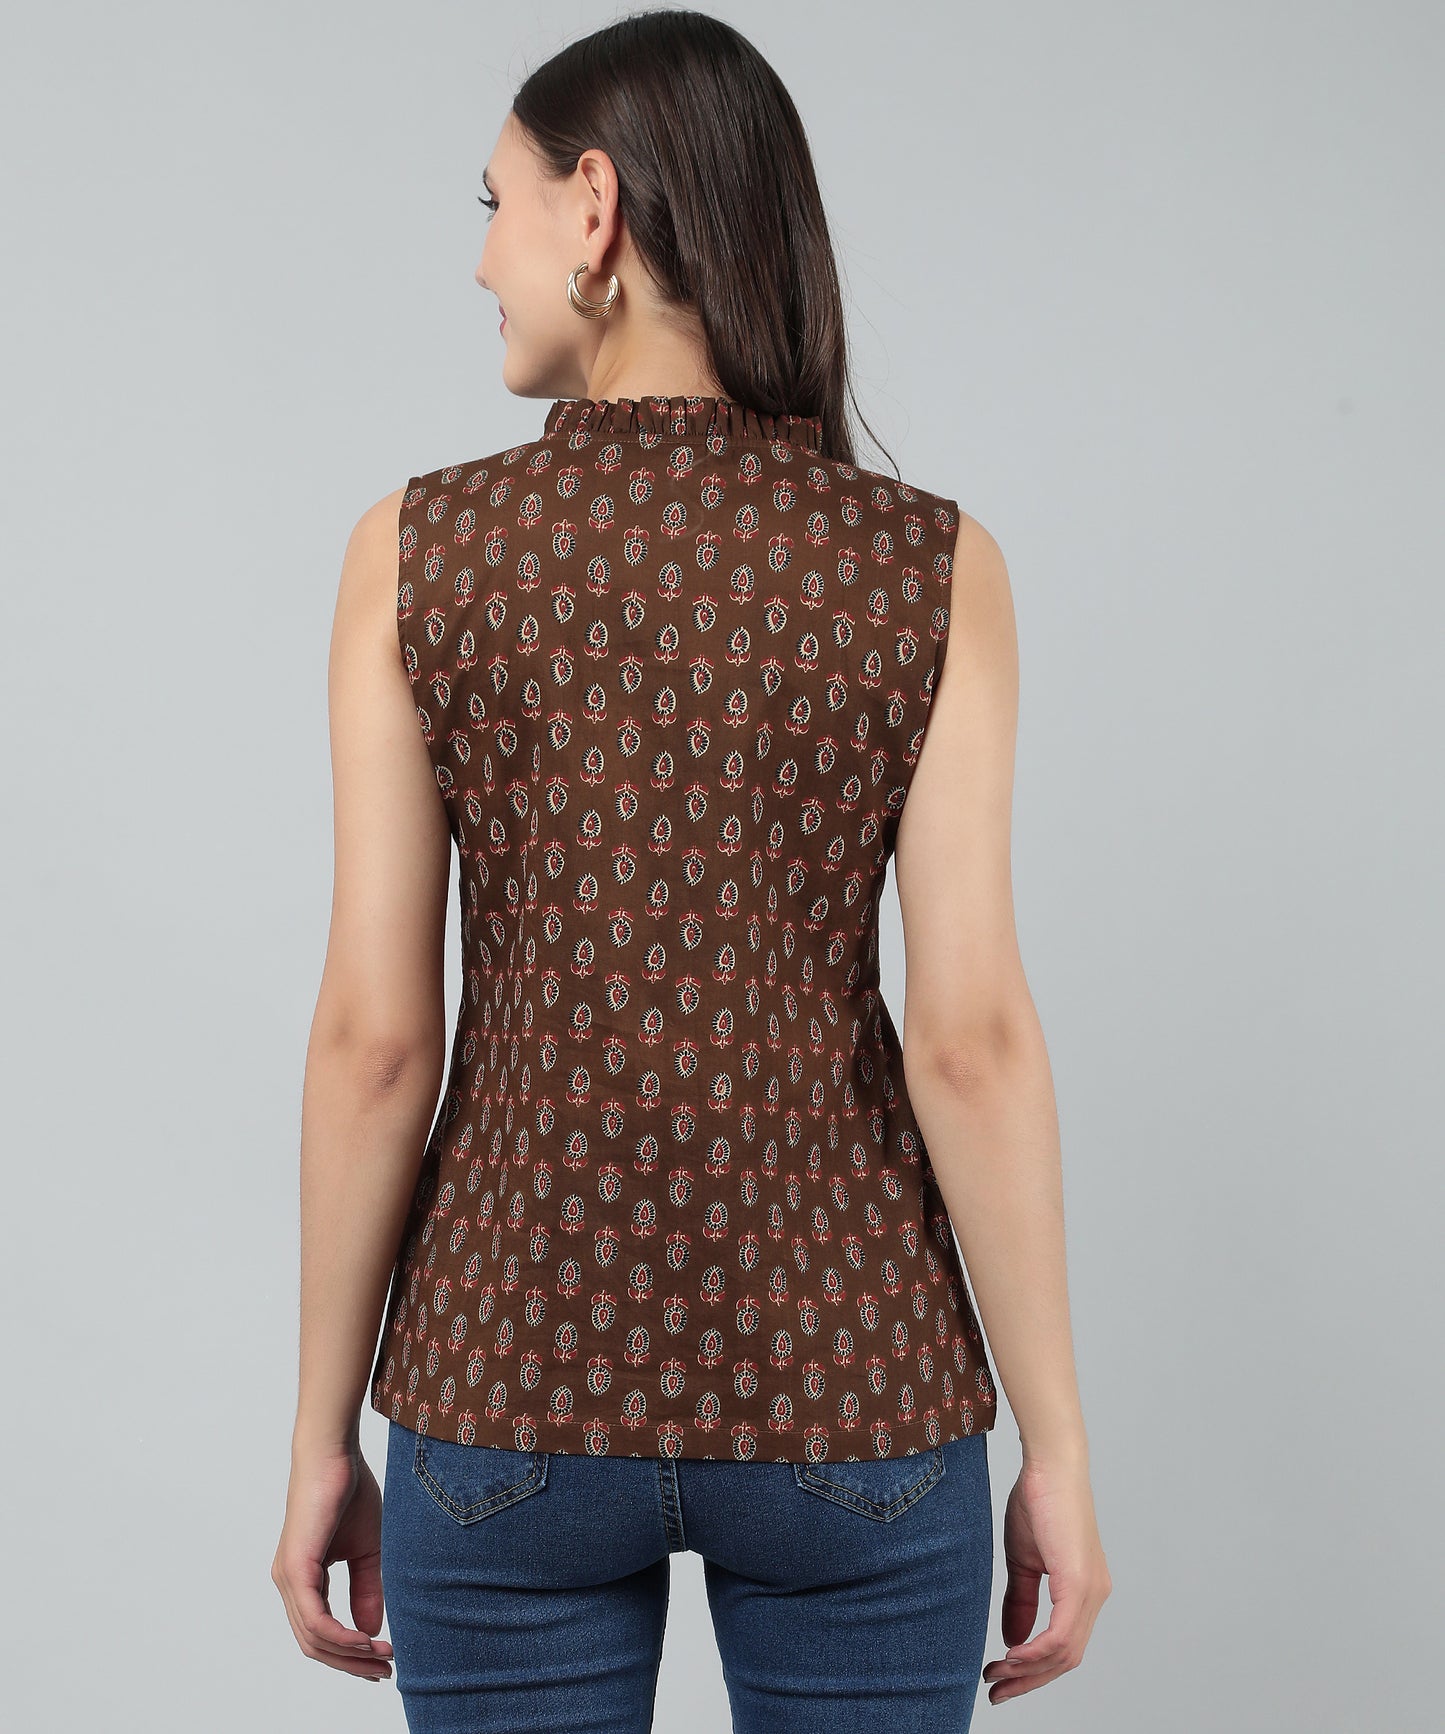 Cotton Printed Top Sleeveless Regular Fit Office Wear Casual Wear Top,Brown